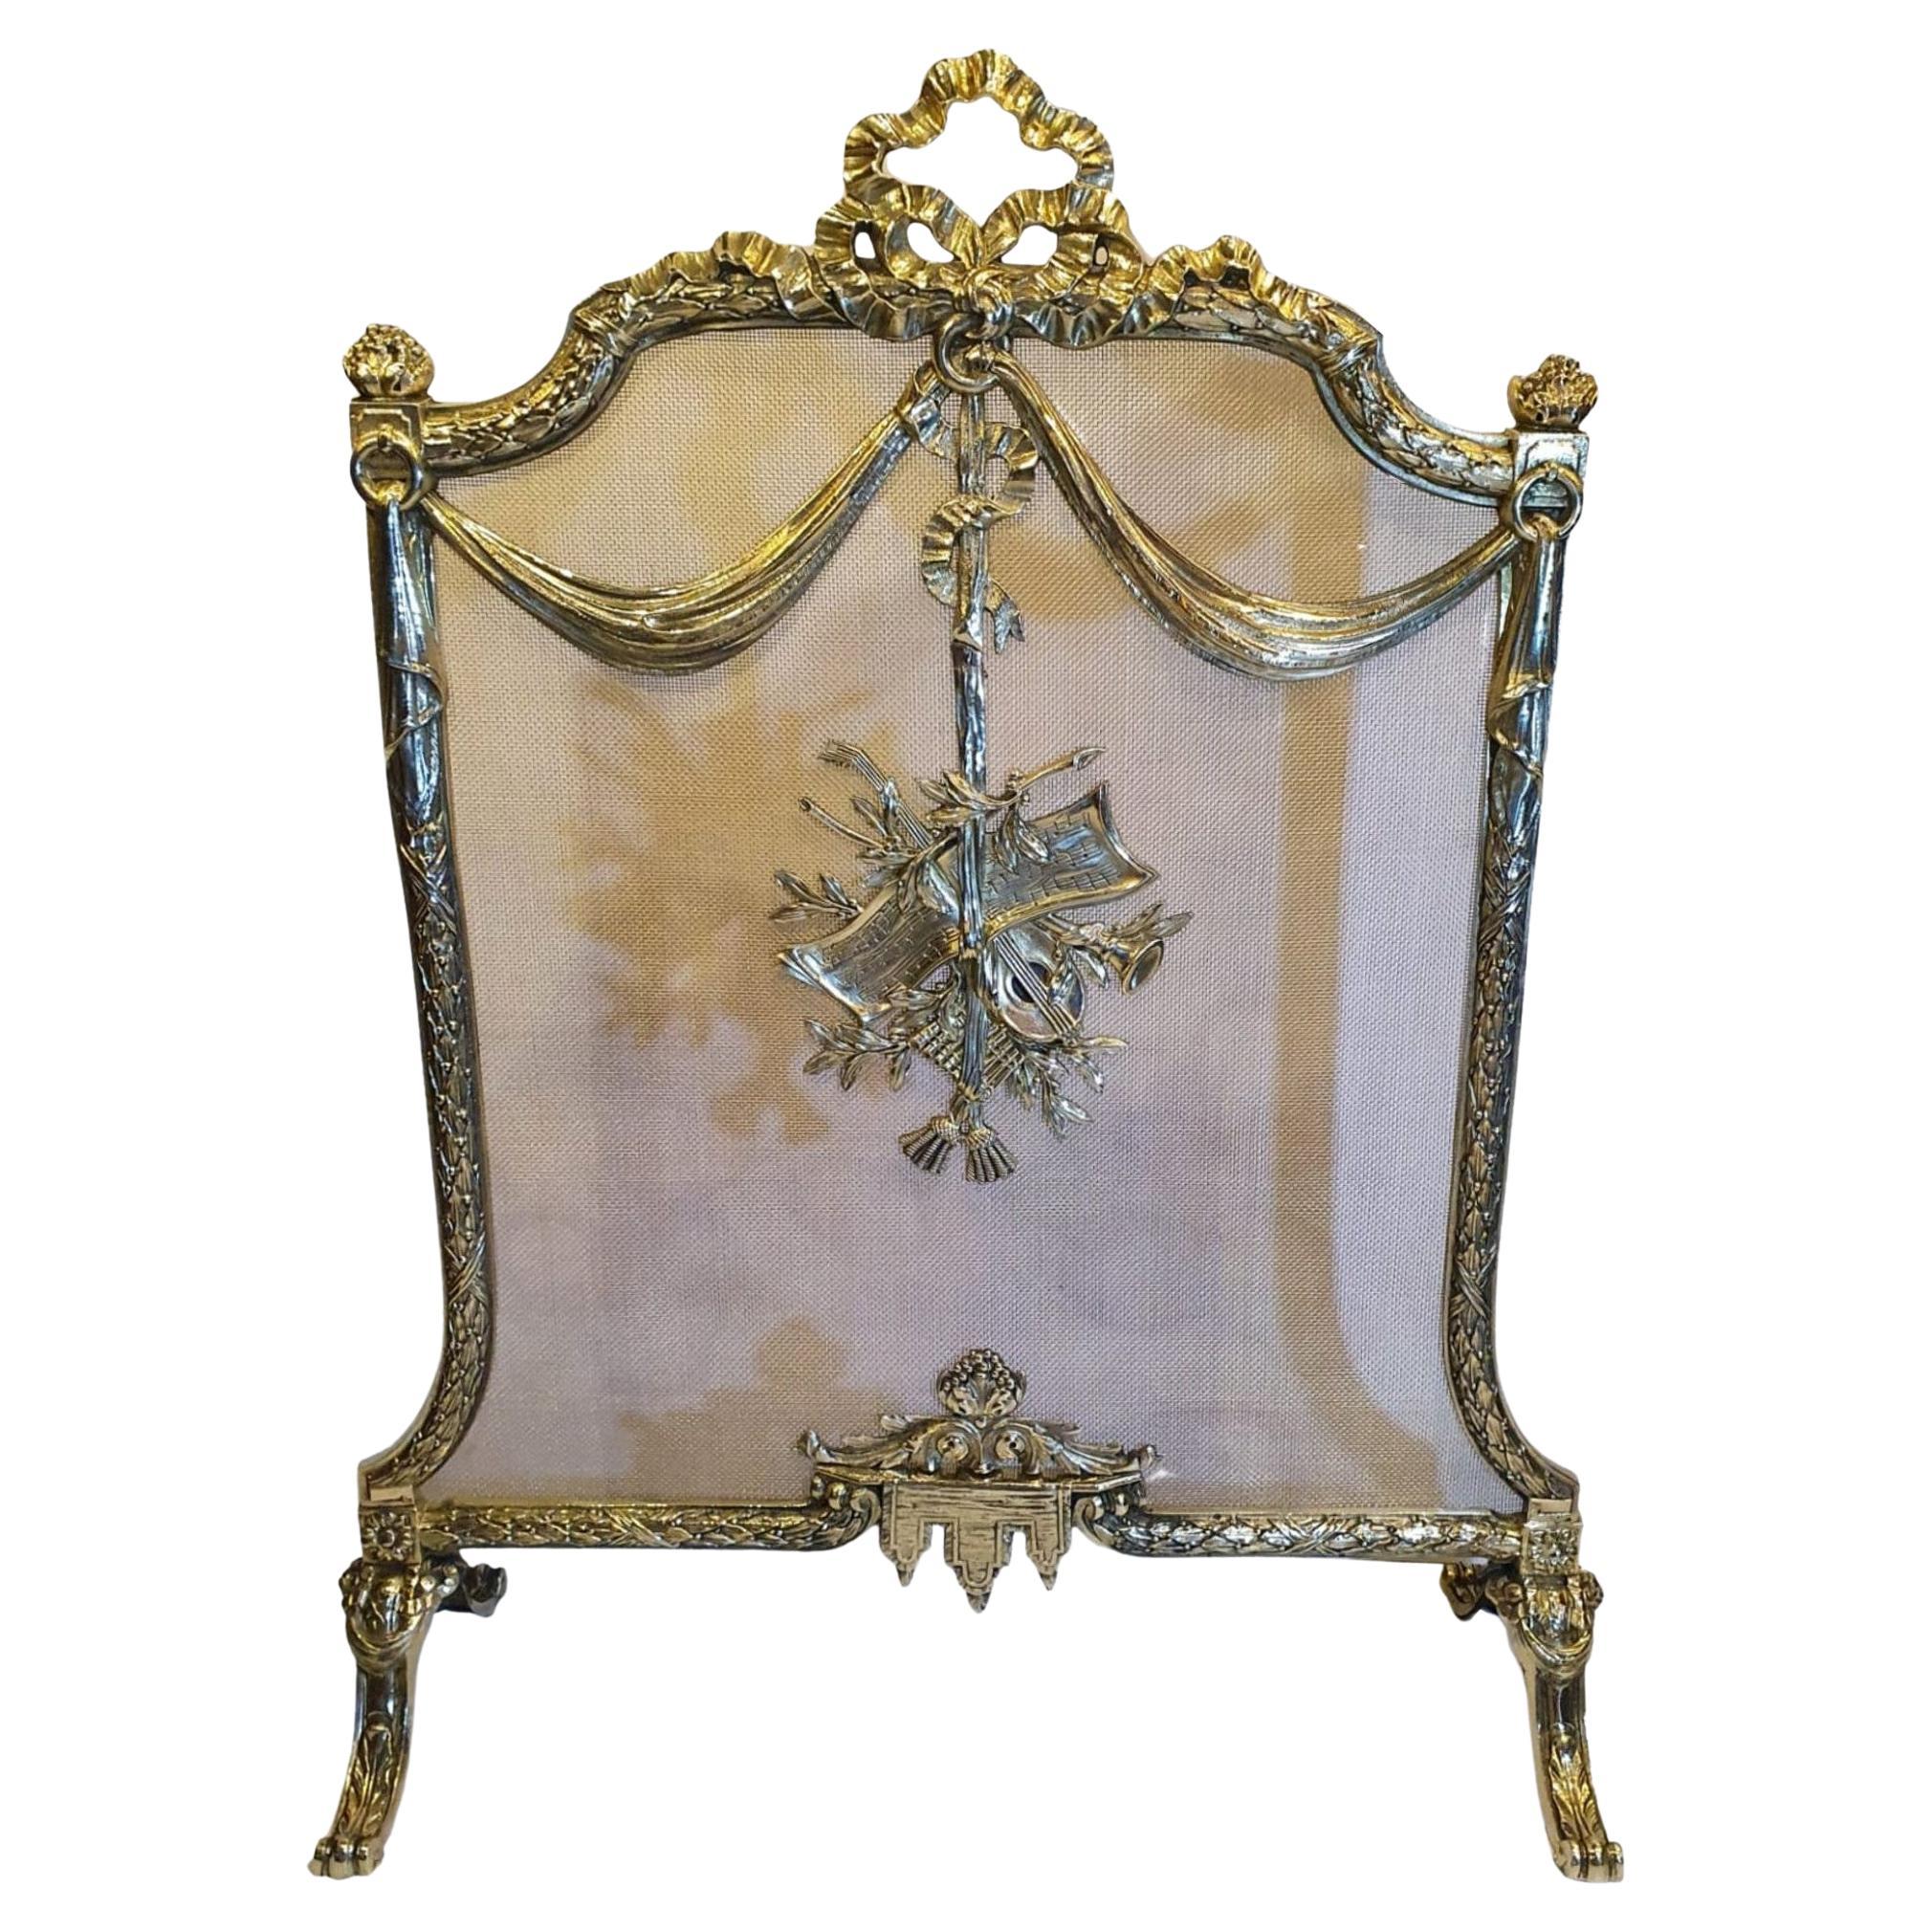 Stunning 19th Century Fully Restored Polished Brass Fire Screen